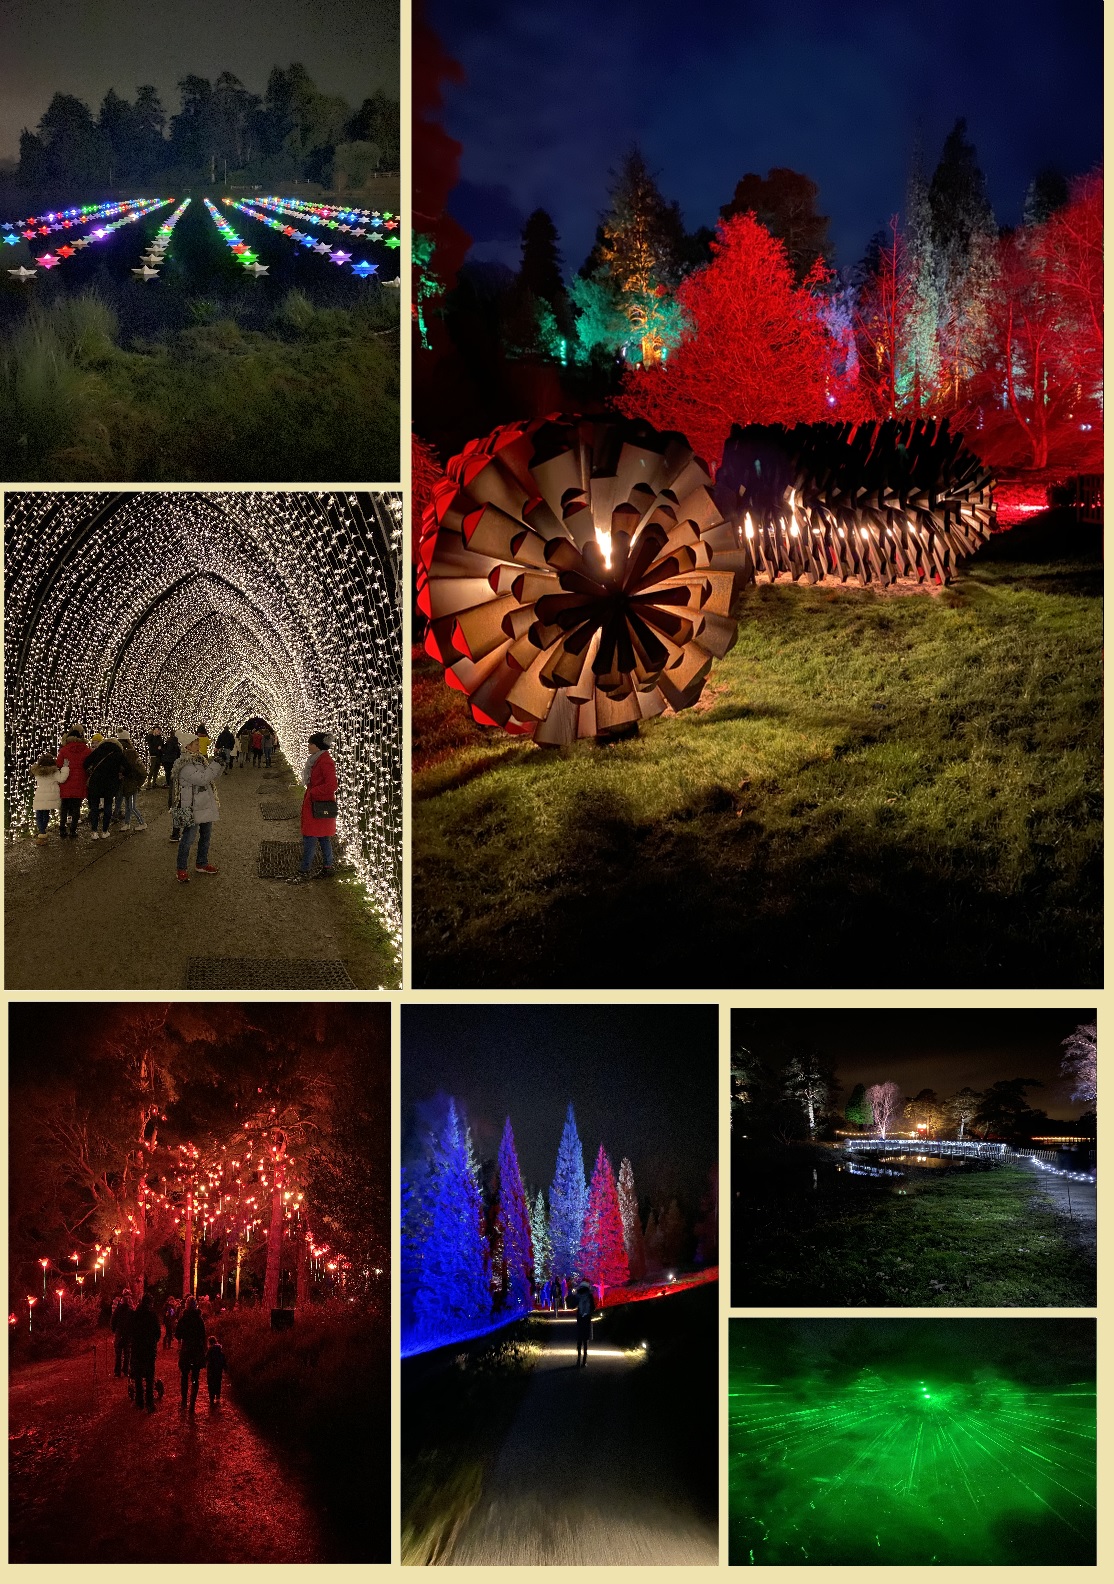 BEDGEBURY PINETUM & FOREST... A VERY MAGICAL TIME OF THE YEAR